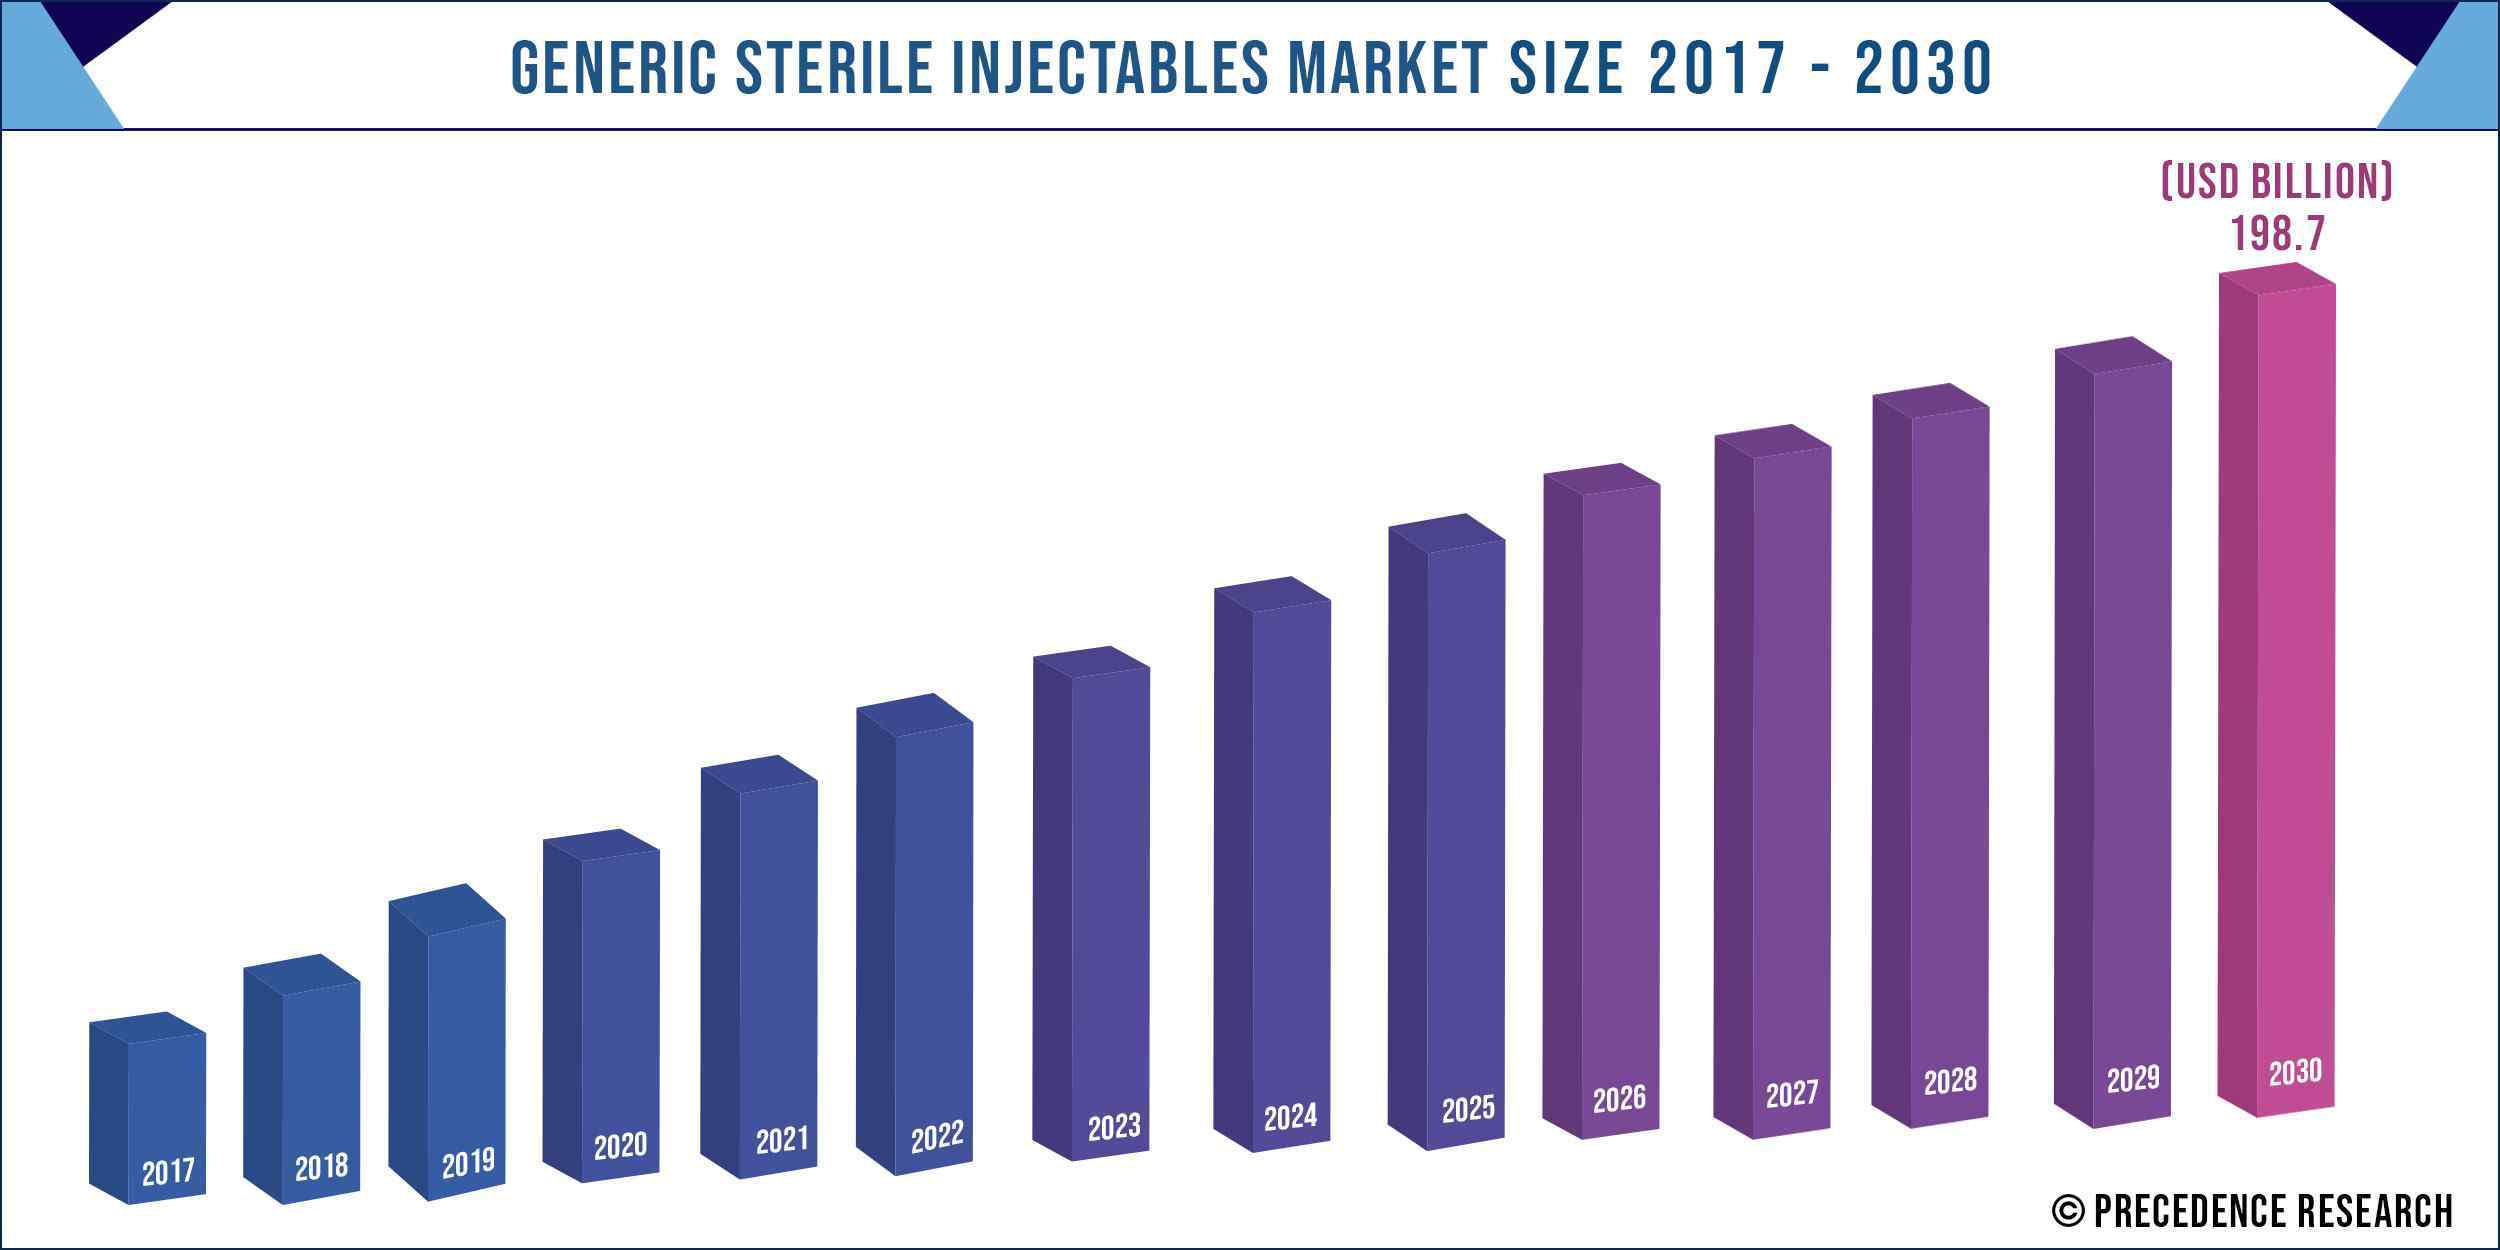 Generic Sterile Injectables Market Size 2017 to 2030